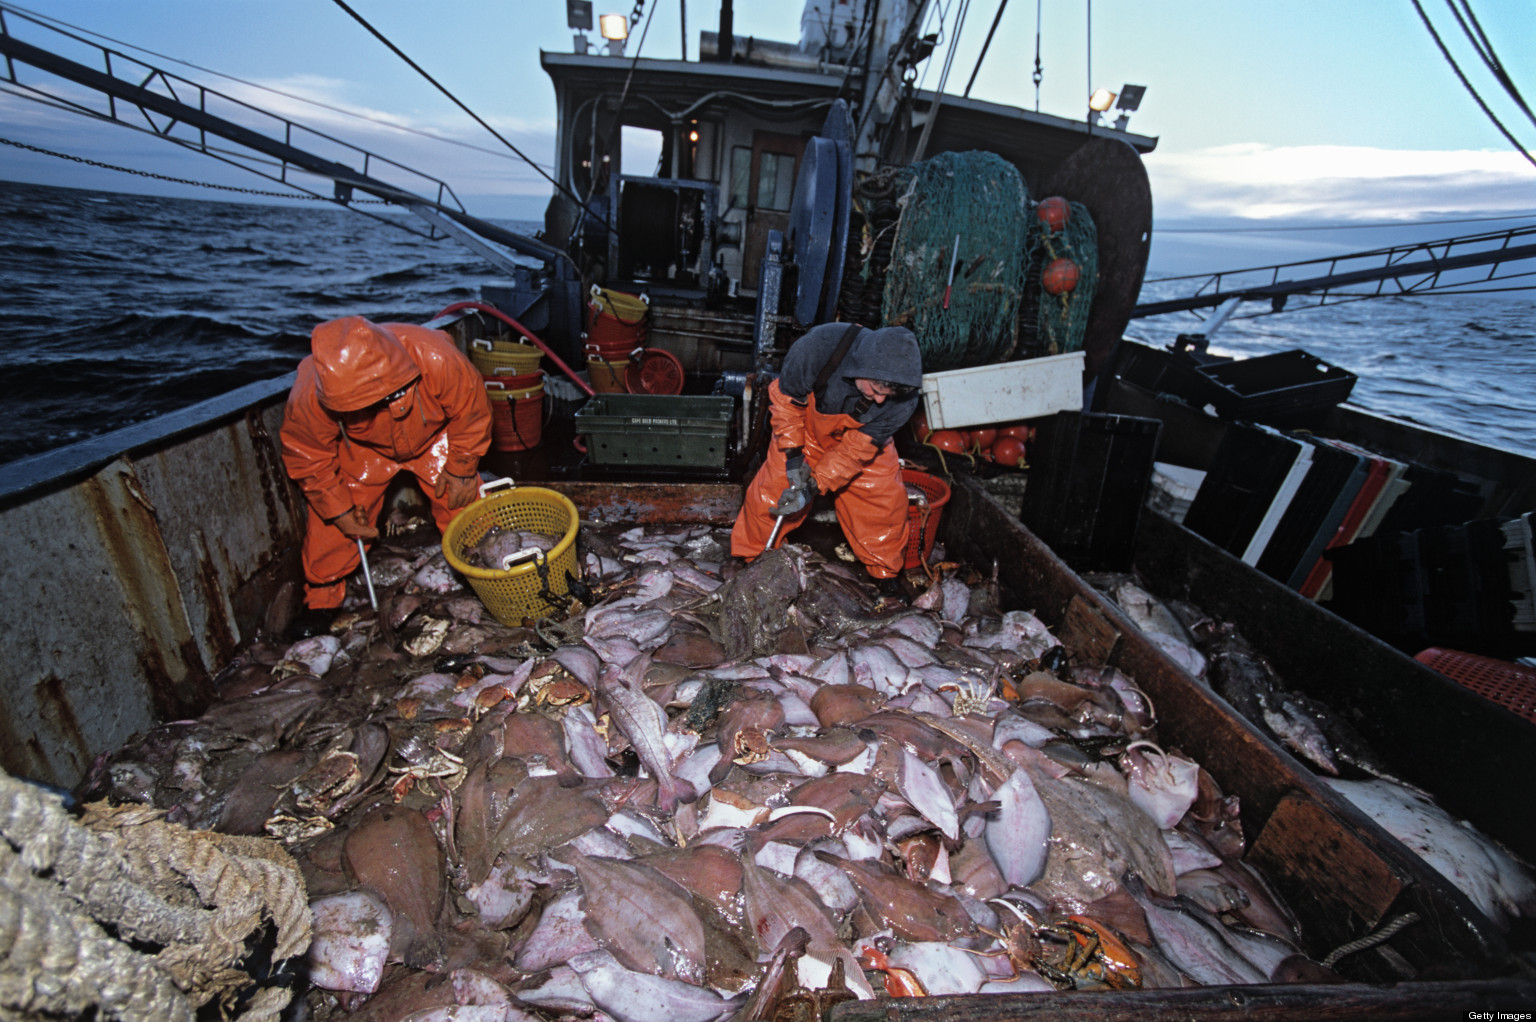 arctic-nations-and-fishing-powers-sign-historic-agreement-on-fishery